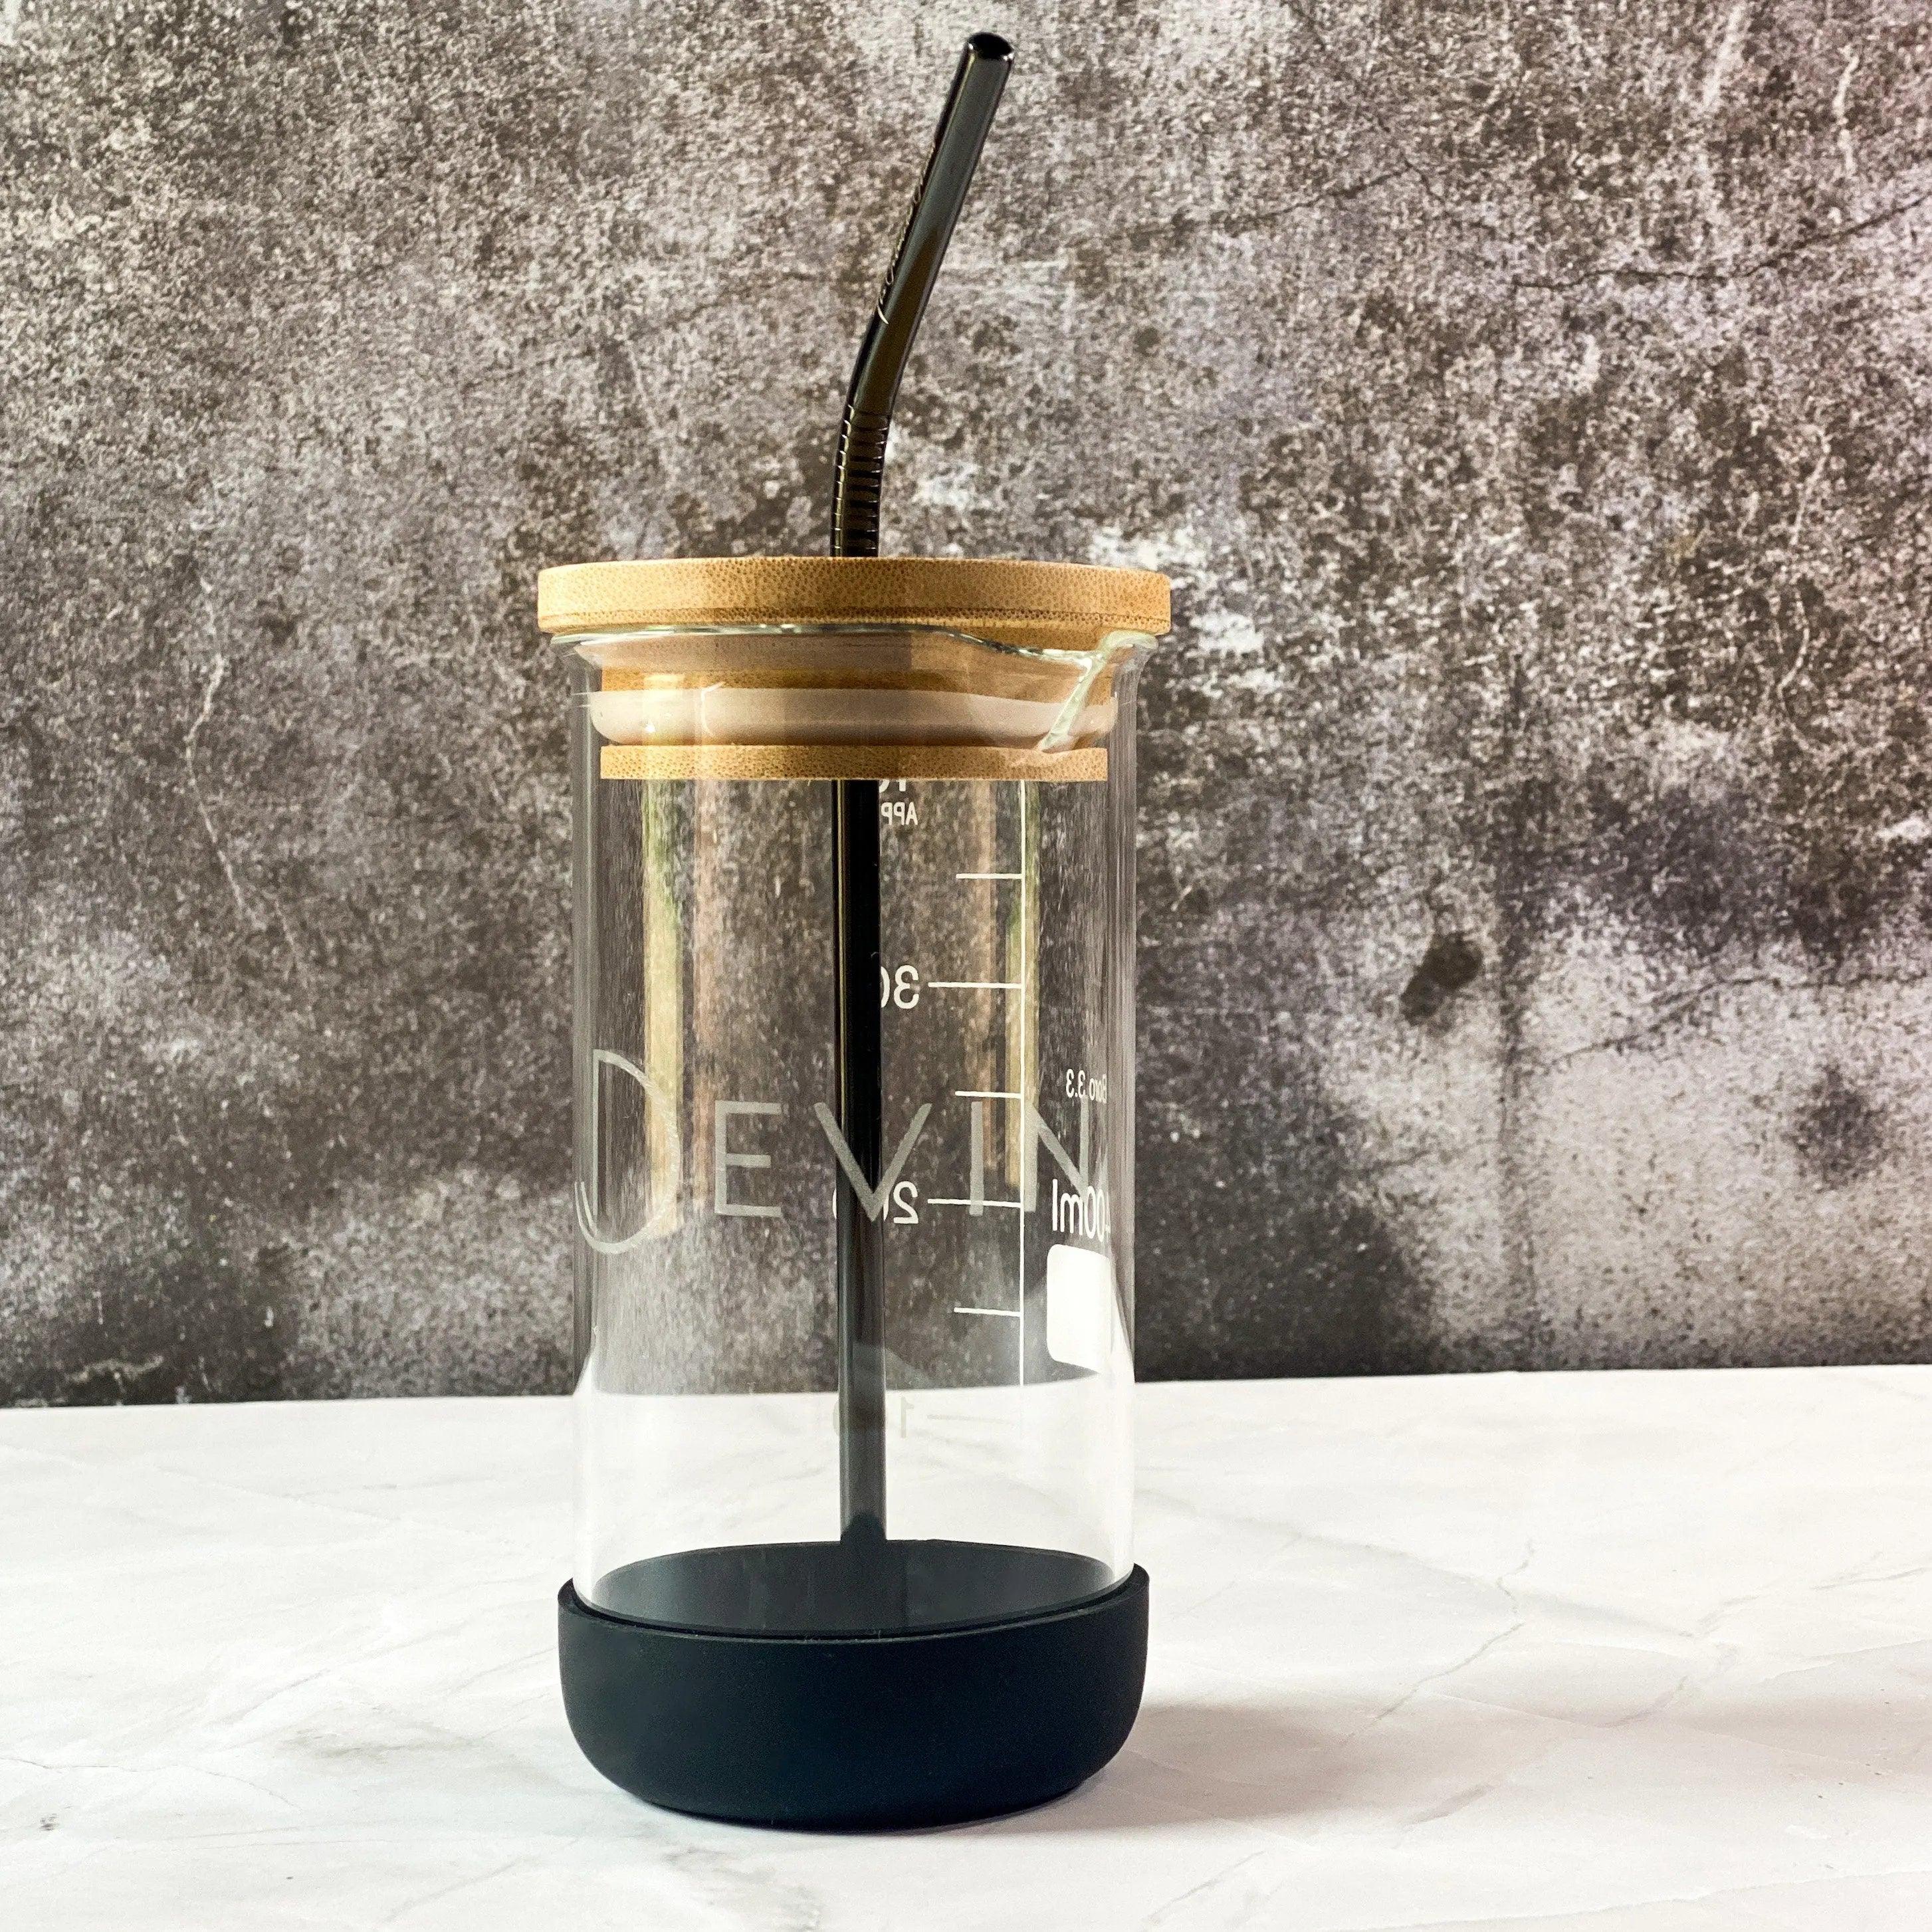 Smaller Chemistry Drink Tumbler With Straw Set - thecalculatedchemist